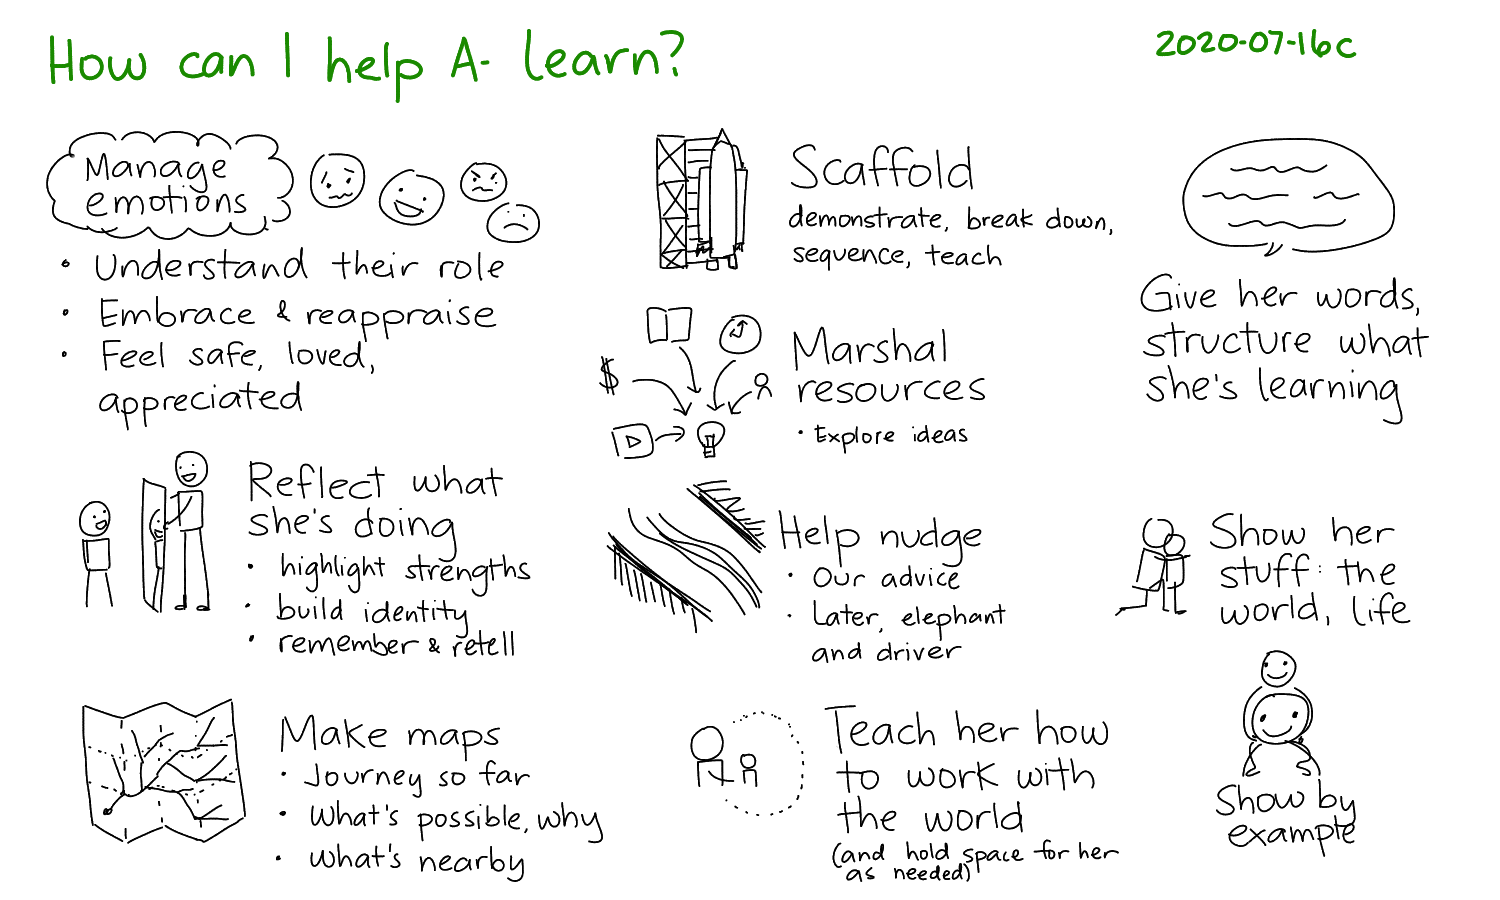 2020-07-16c How can I help A- learn #parenting #education.png